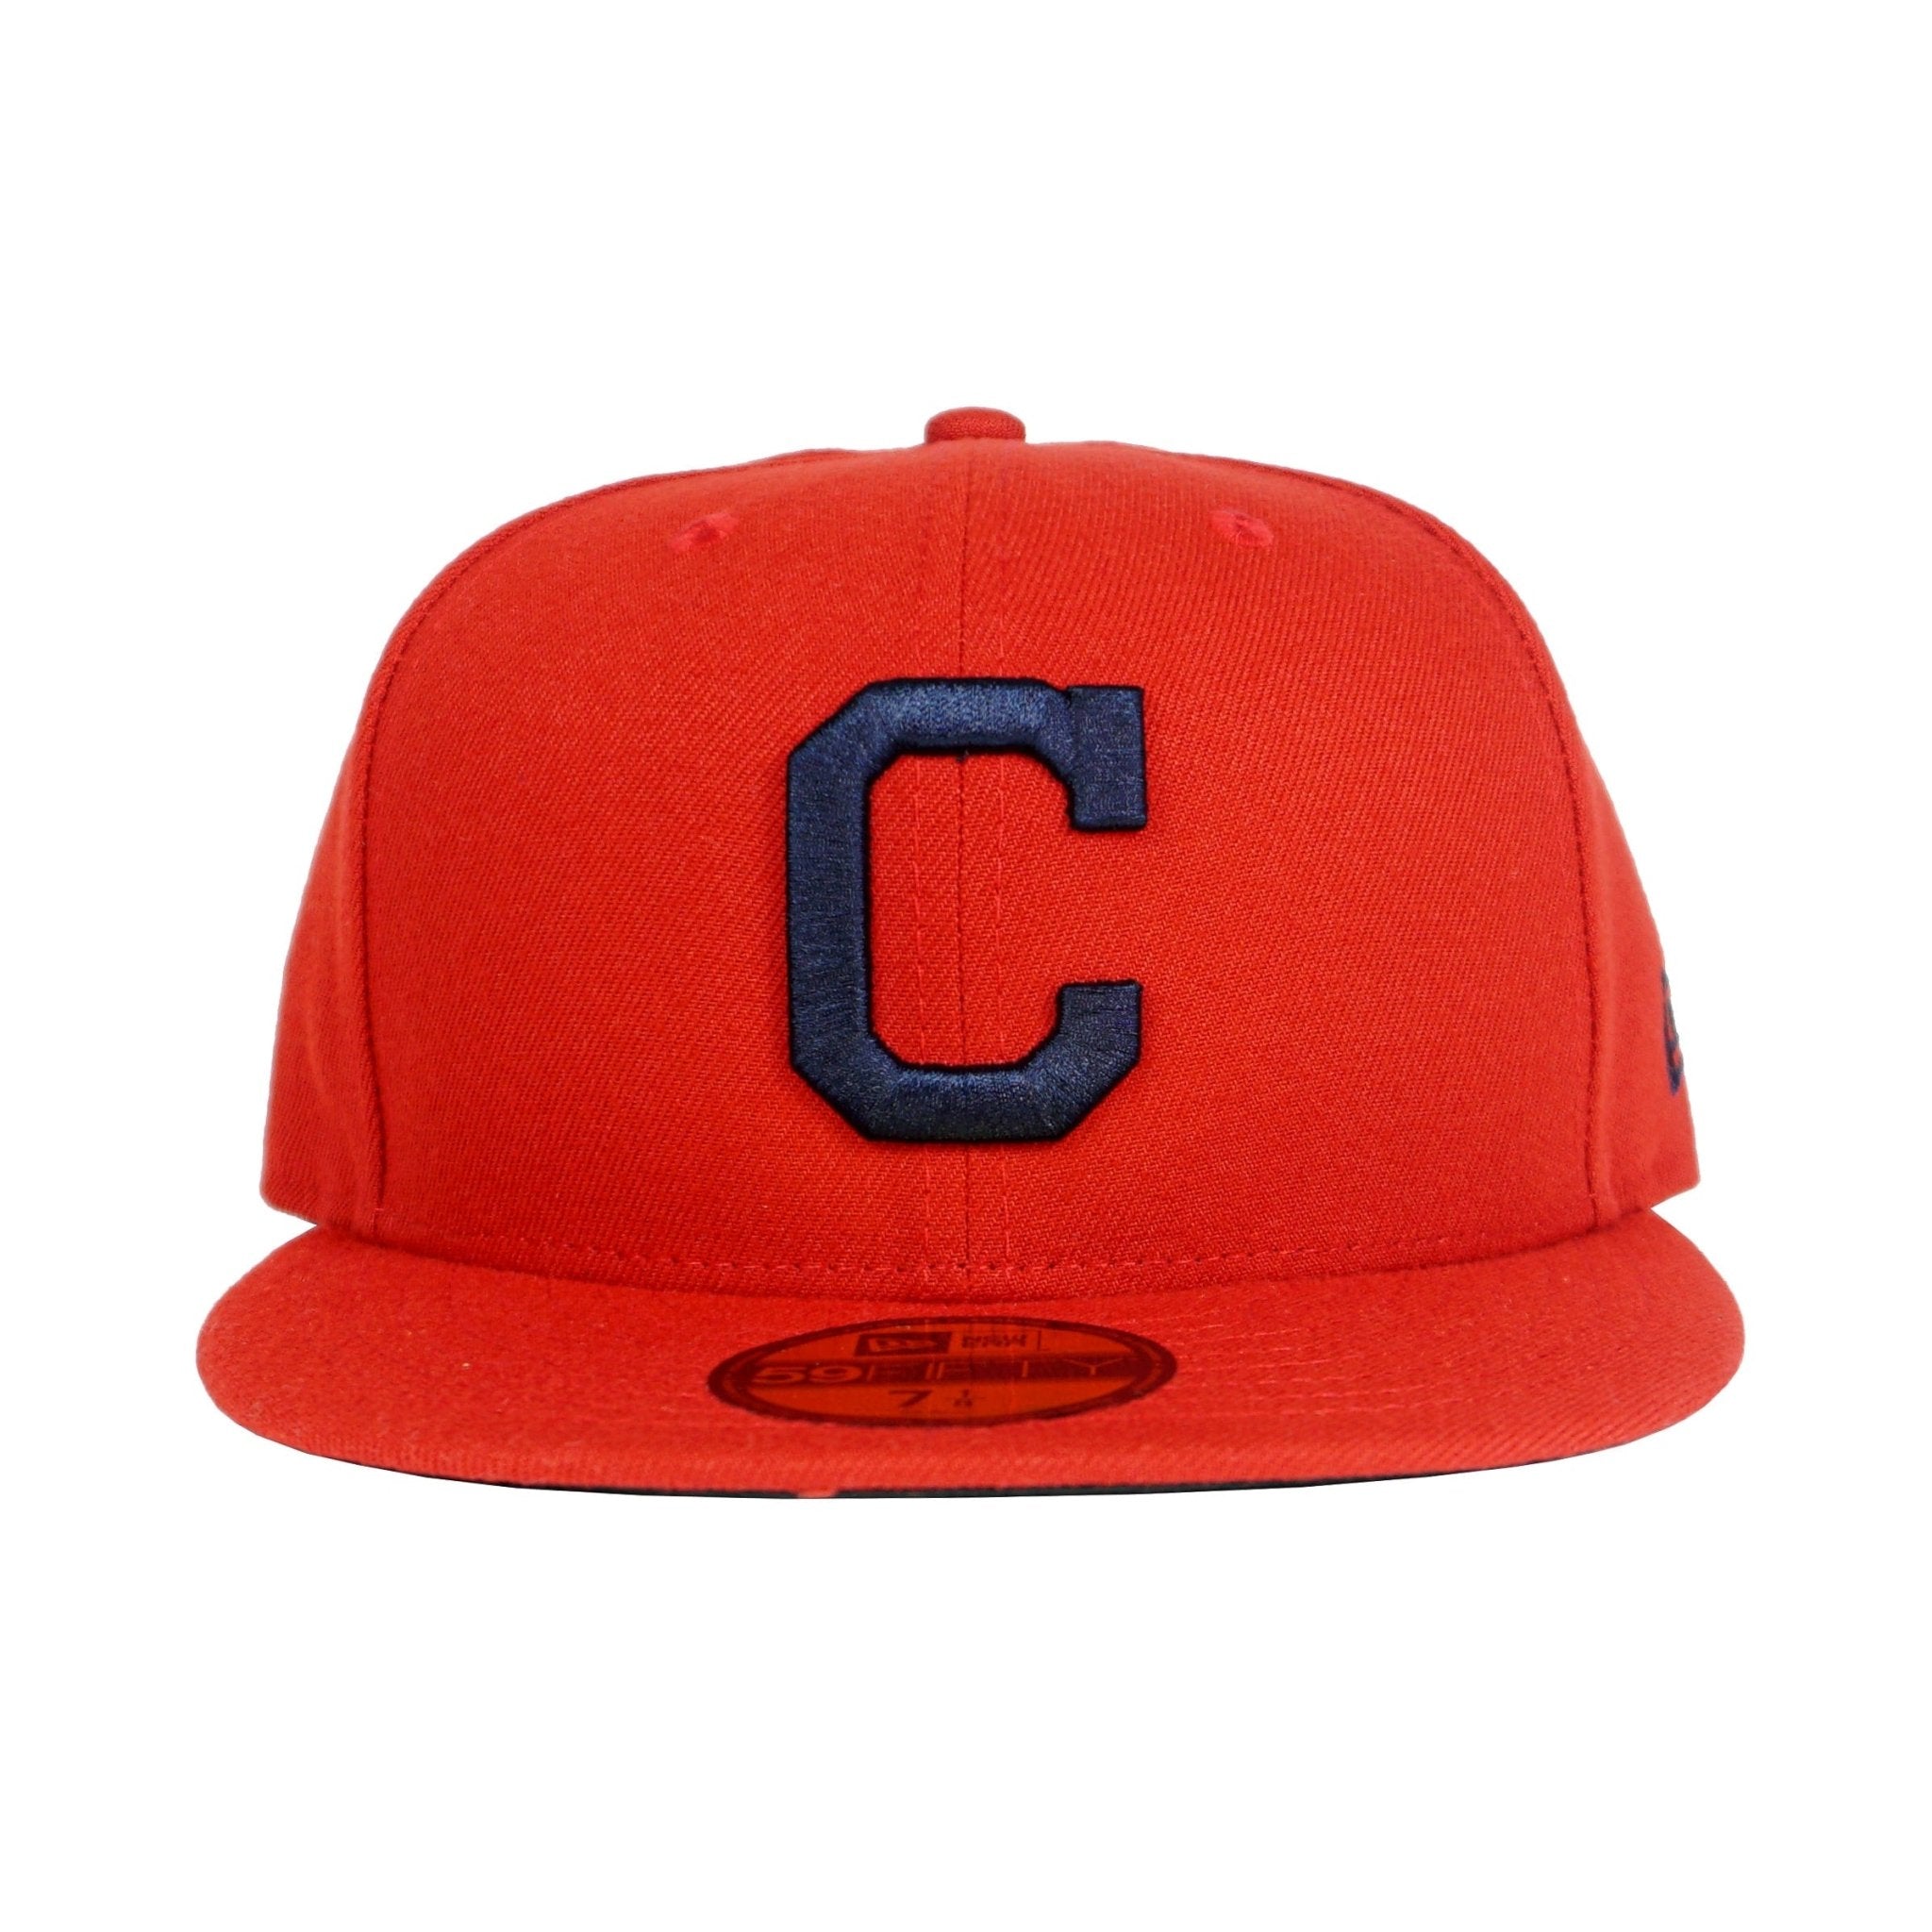 Cleveland Indians Alternate Authentic Collection 59Fifty Fitted Hat in red and navy